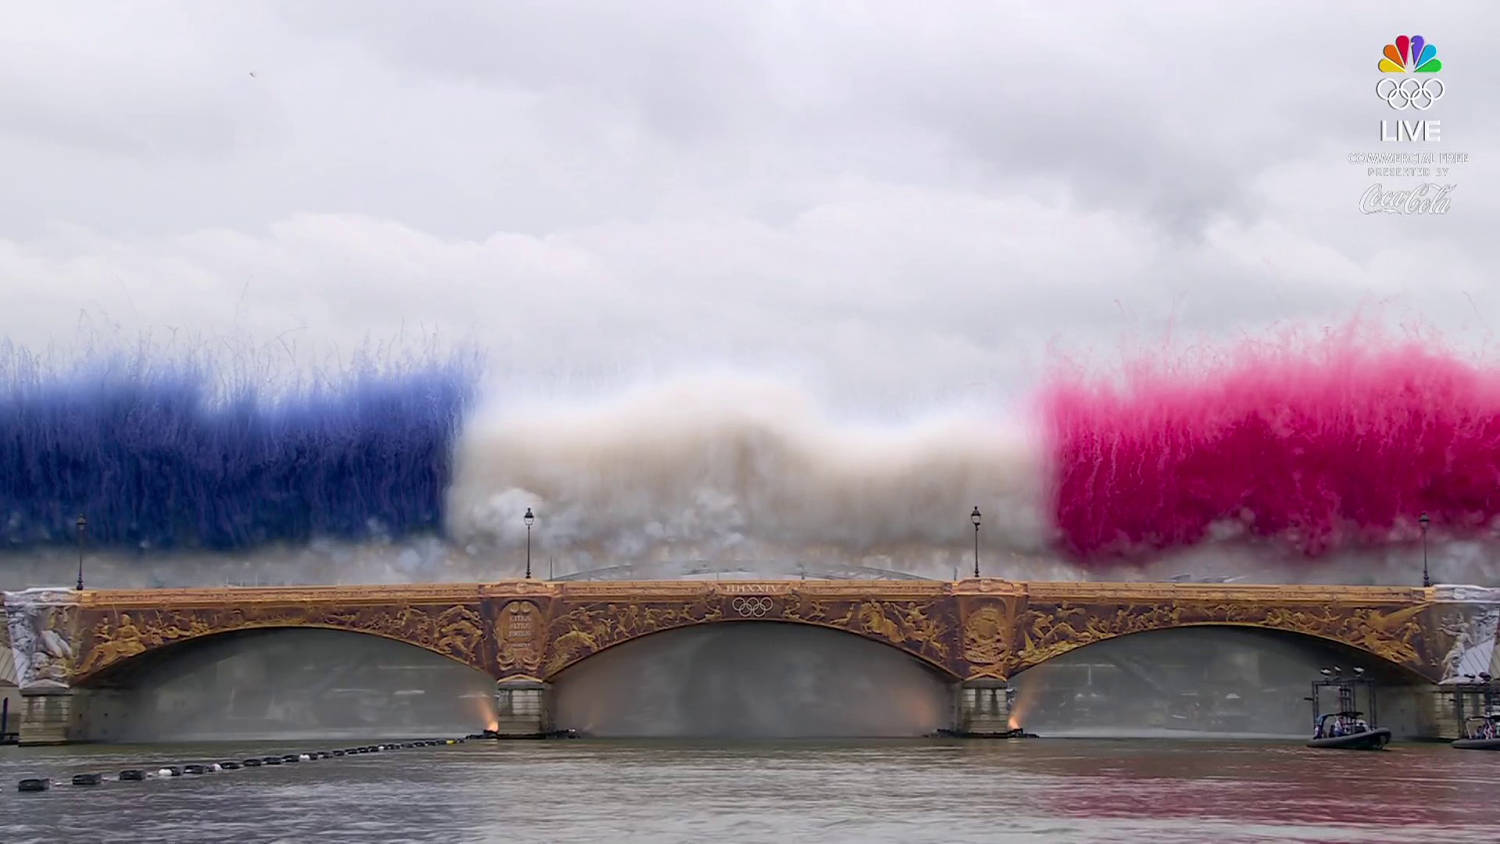 Watch: French flag-colored plumes of smoke burst from Paris bridge at Olympics opening ceremony